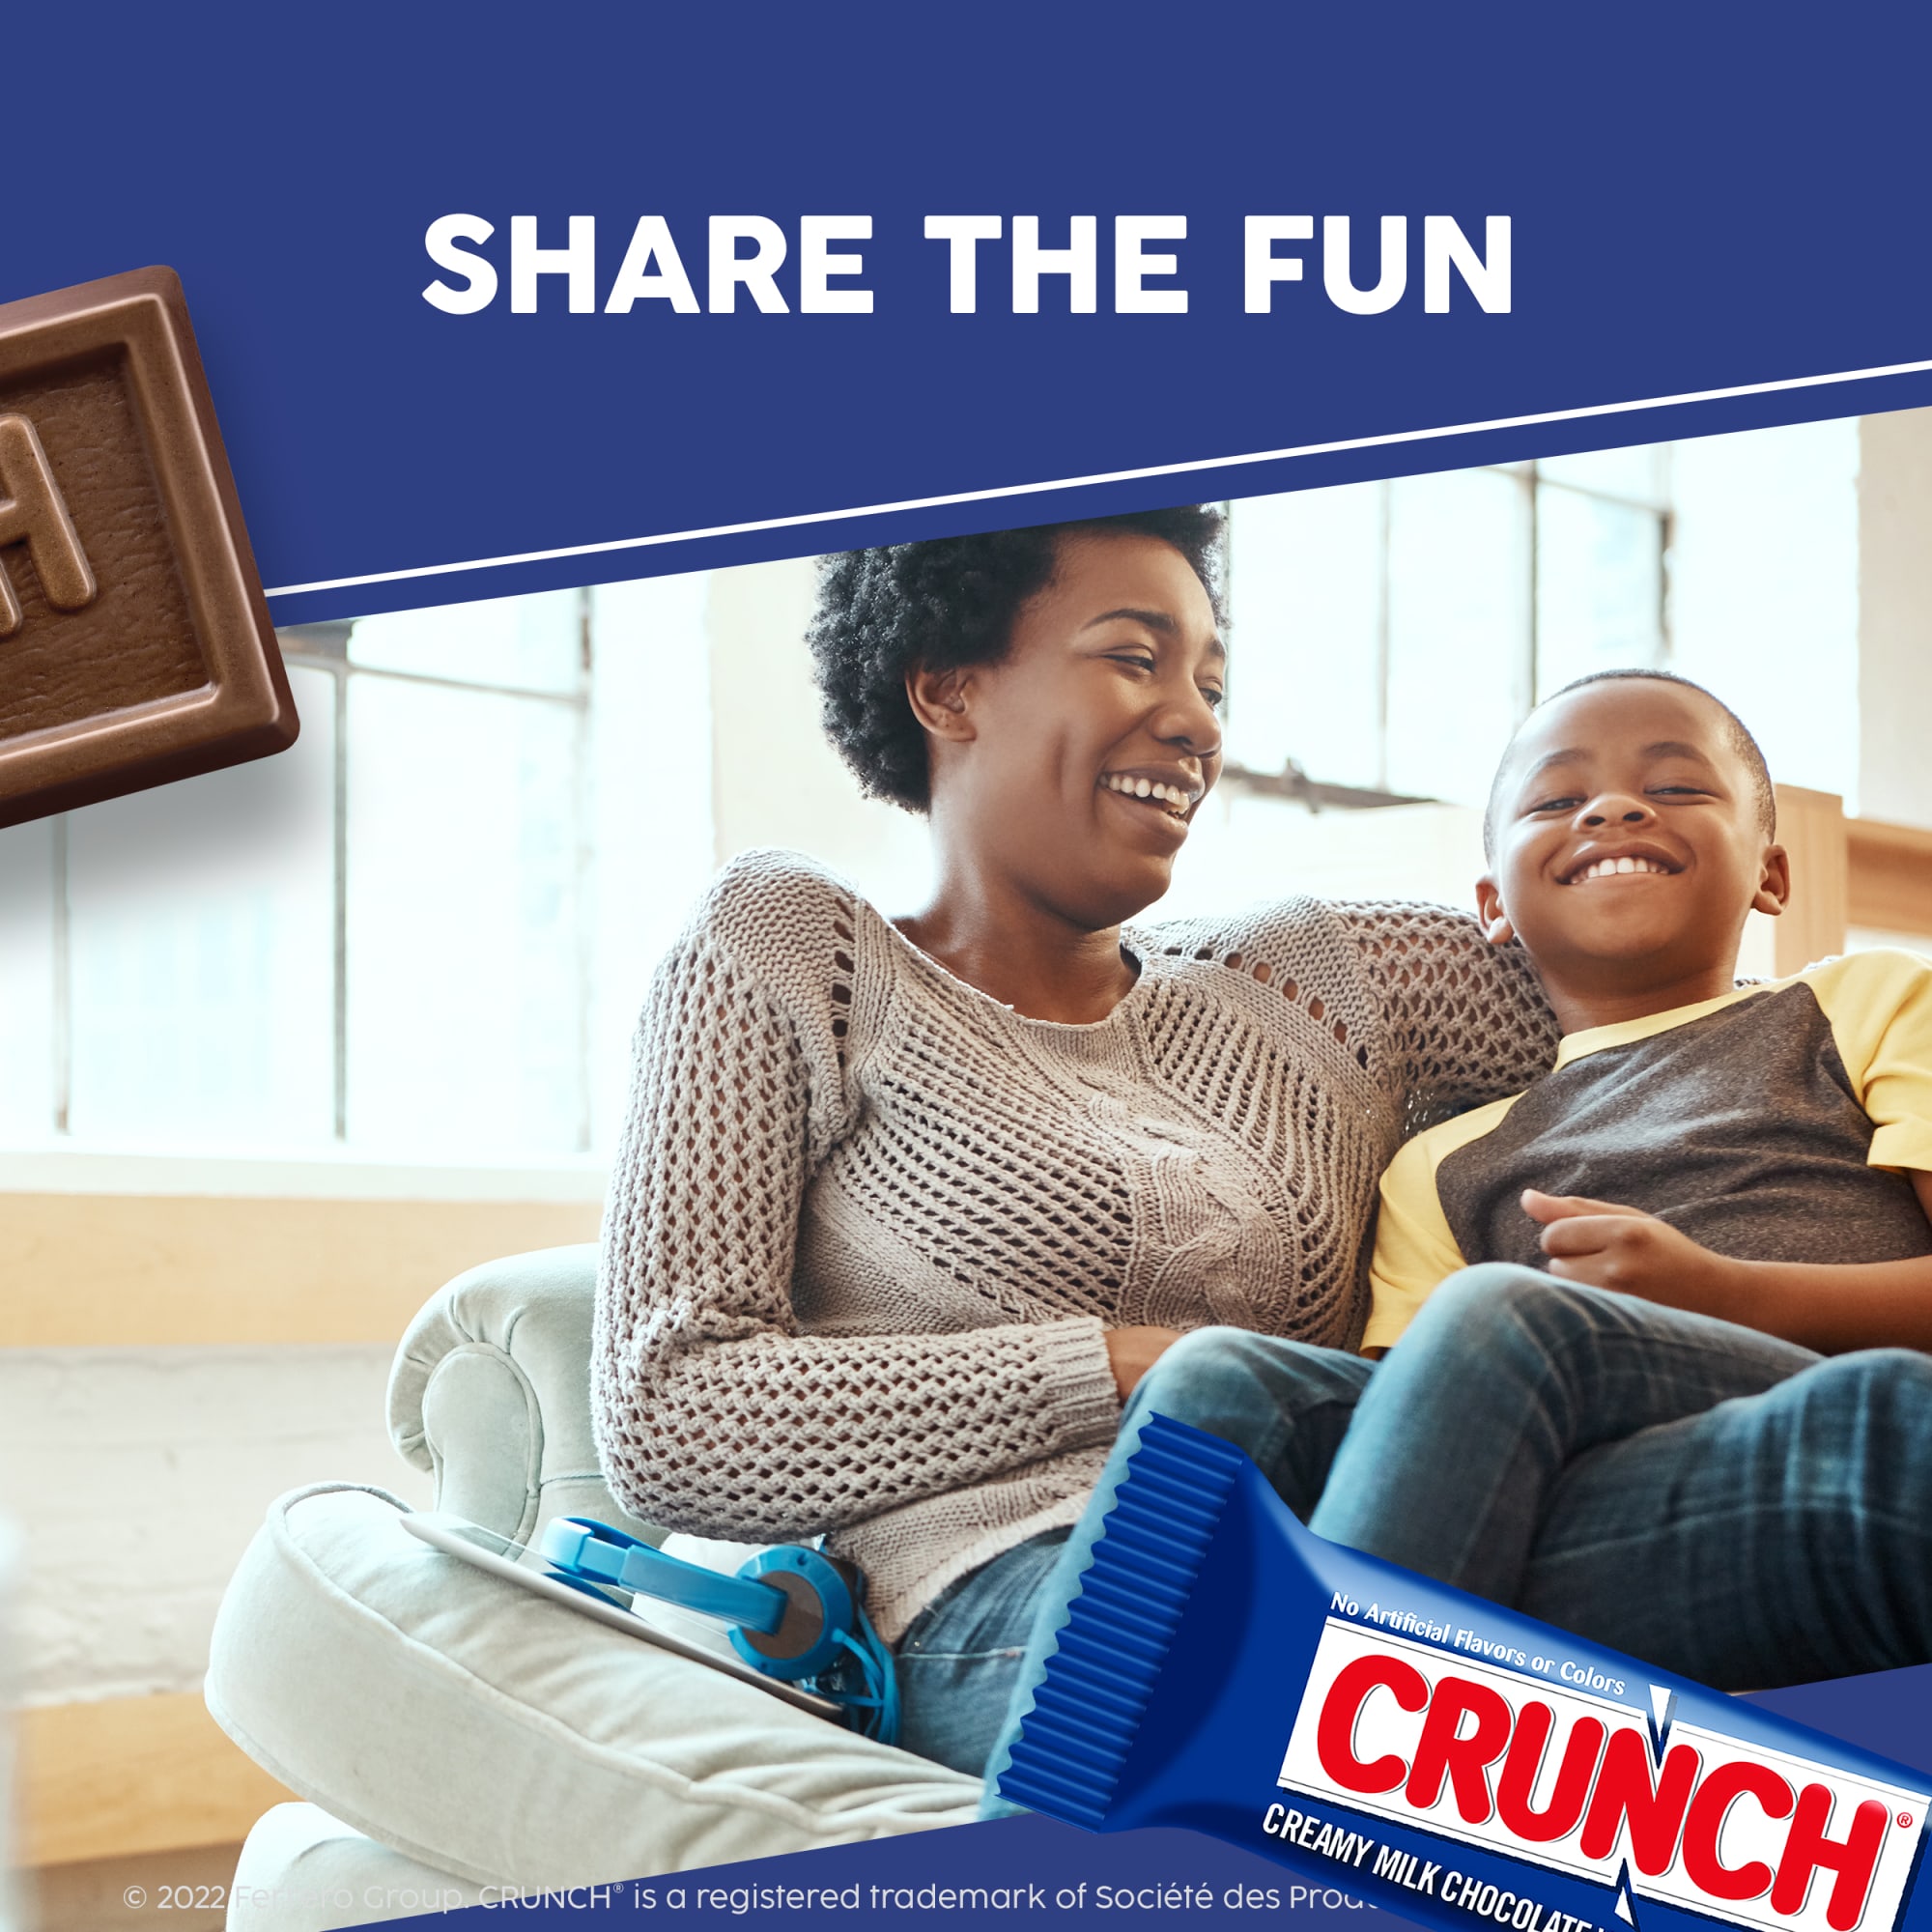 CRUNCH, Milk Chocolate and Crisped Rice, Fun Size Candy Bars, 10 oz - image 5 of 11